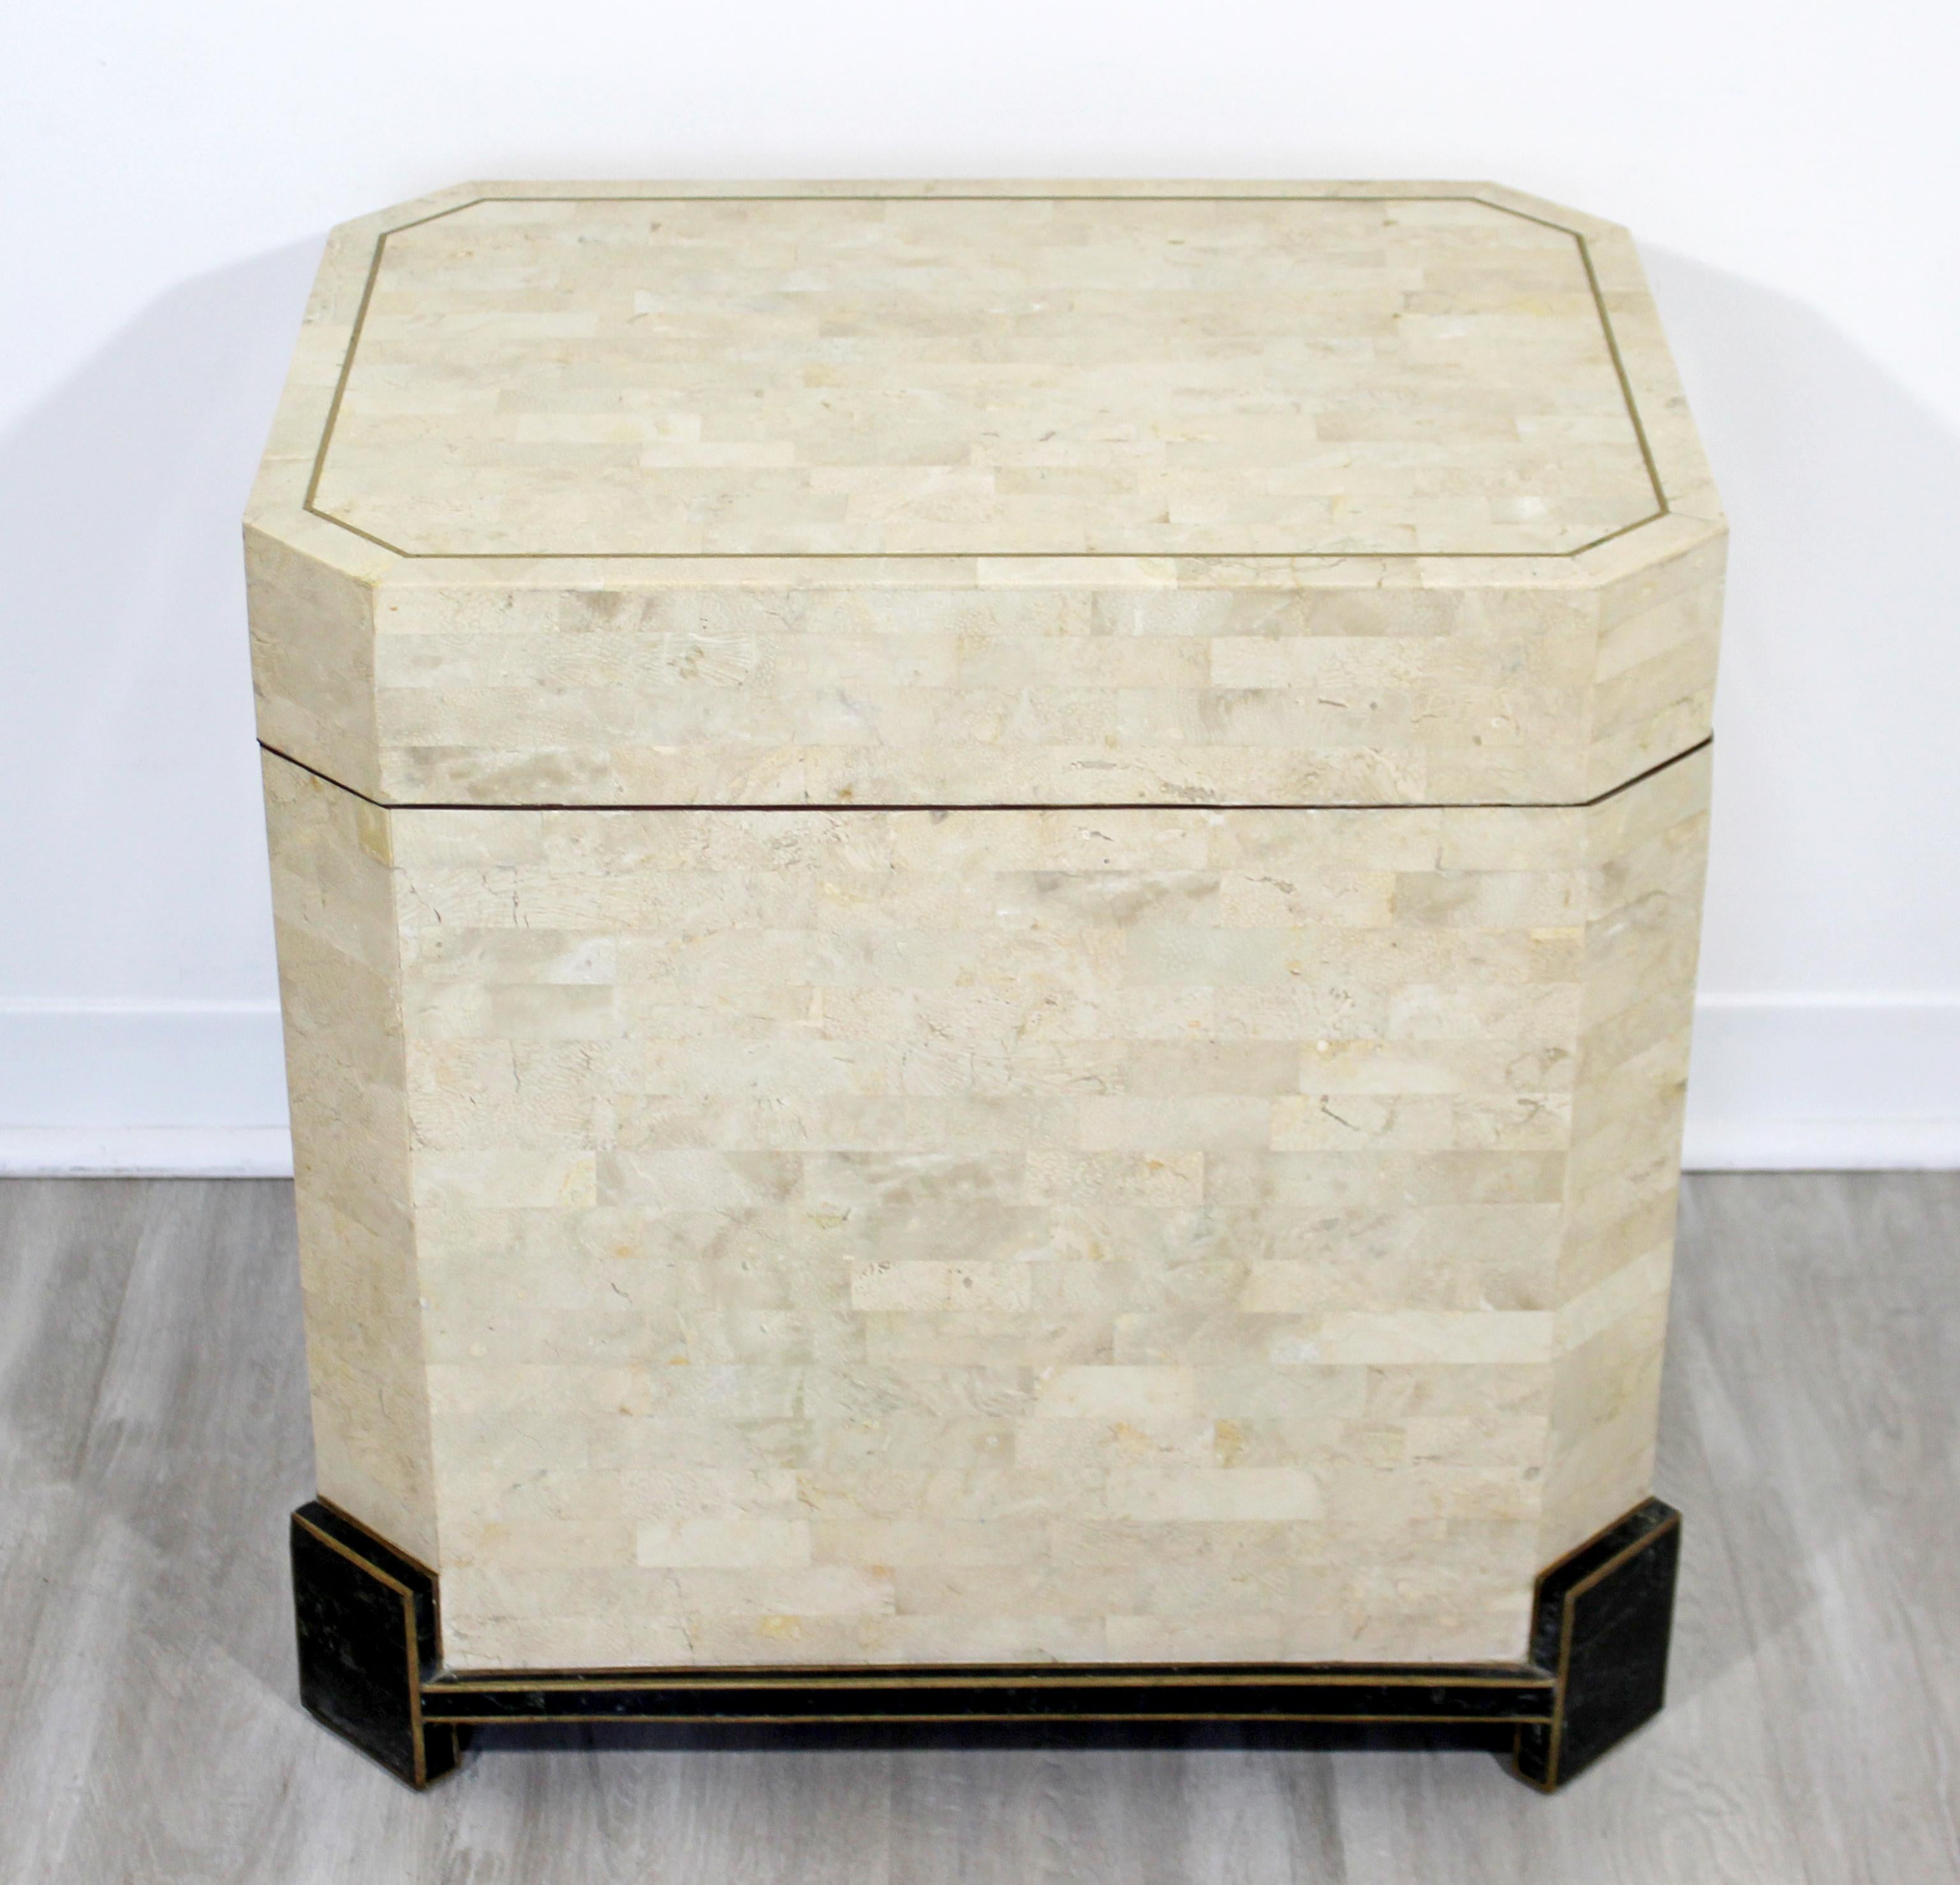 For your consideration is a fantastic standing chest, made of tessellated fossil stone, by Robert Marcius for Casa Bique, circa 1980s. In excellent vintage condition. The dimensions are 22.5